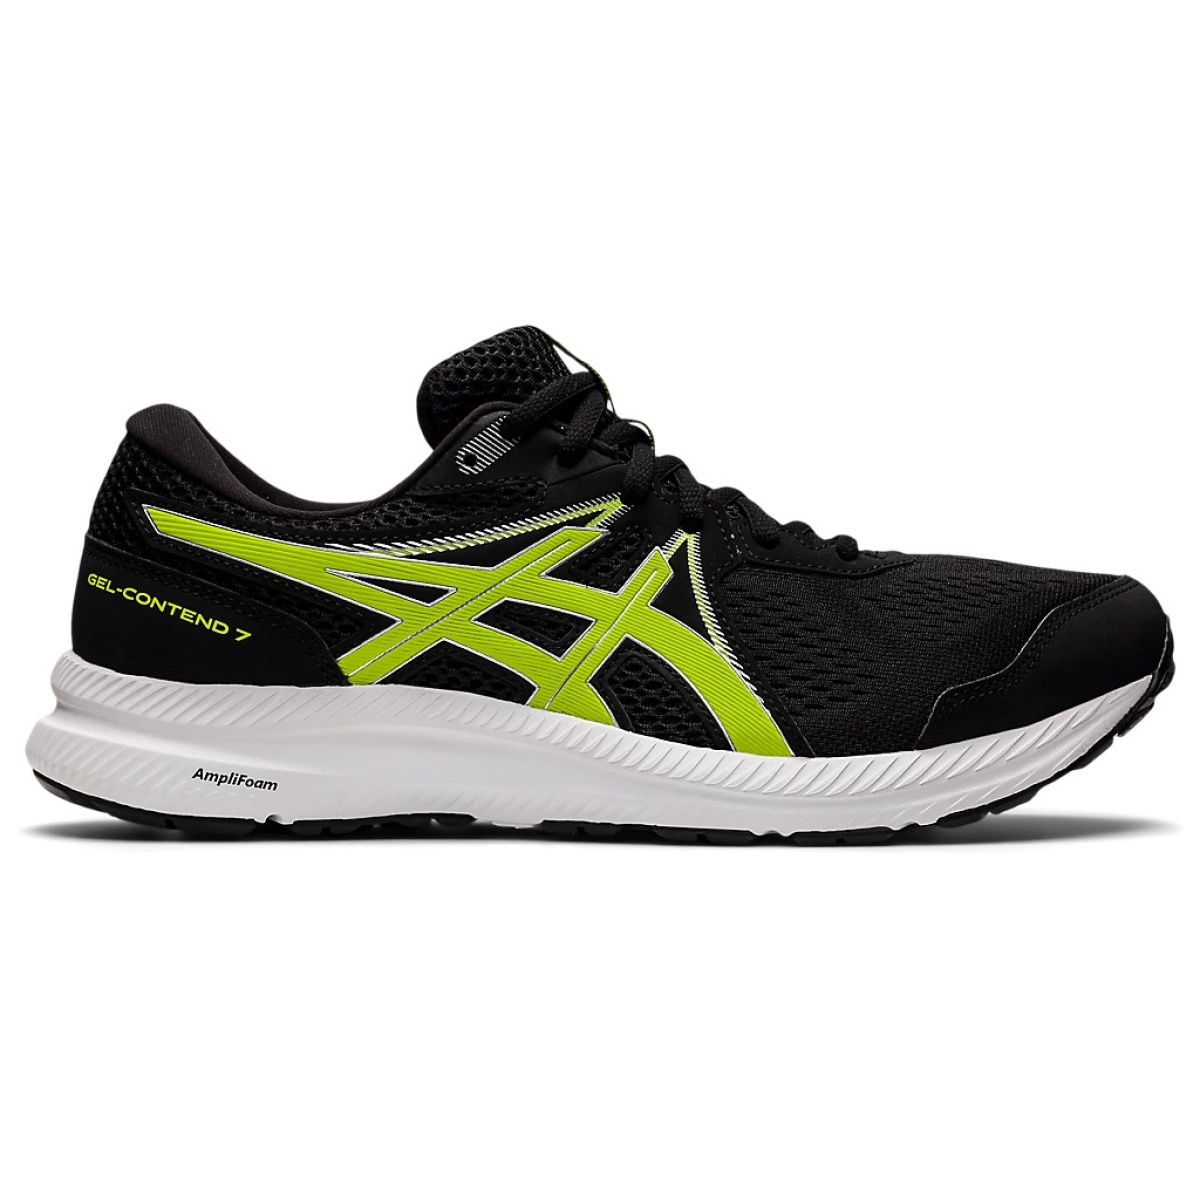 Buy Asics Gel Contend 7 Mens Running Shoes @ Lowest Prices - Sportsuncle